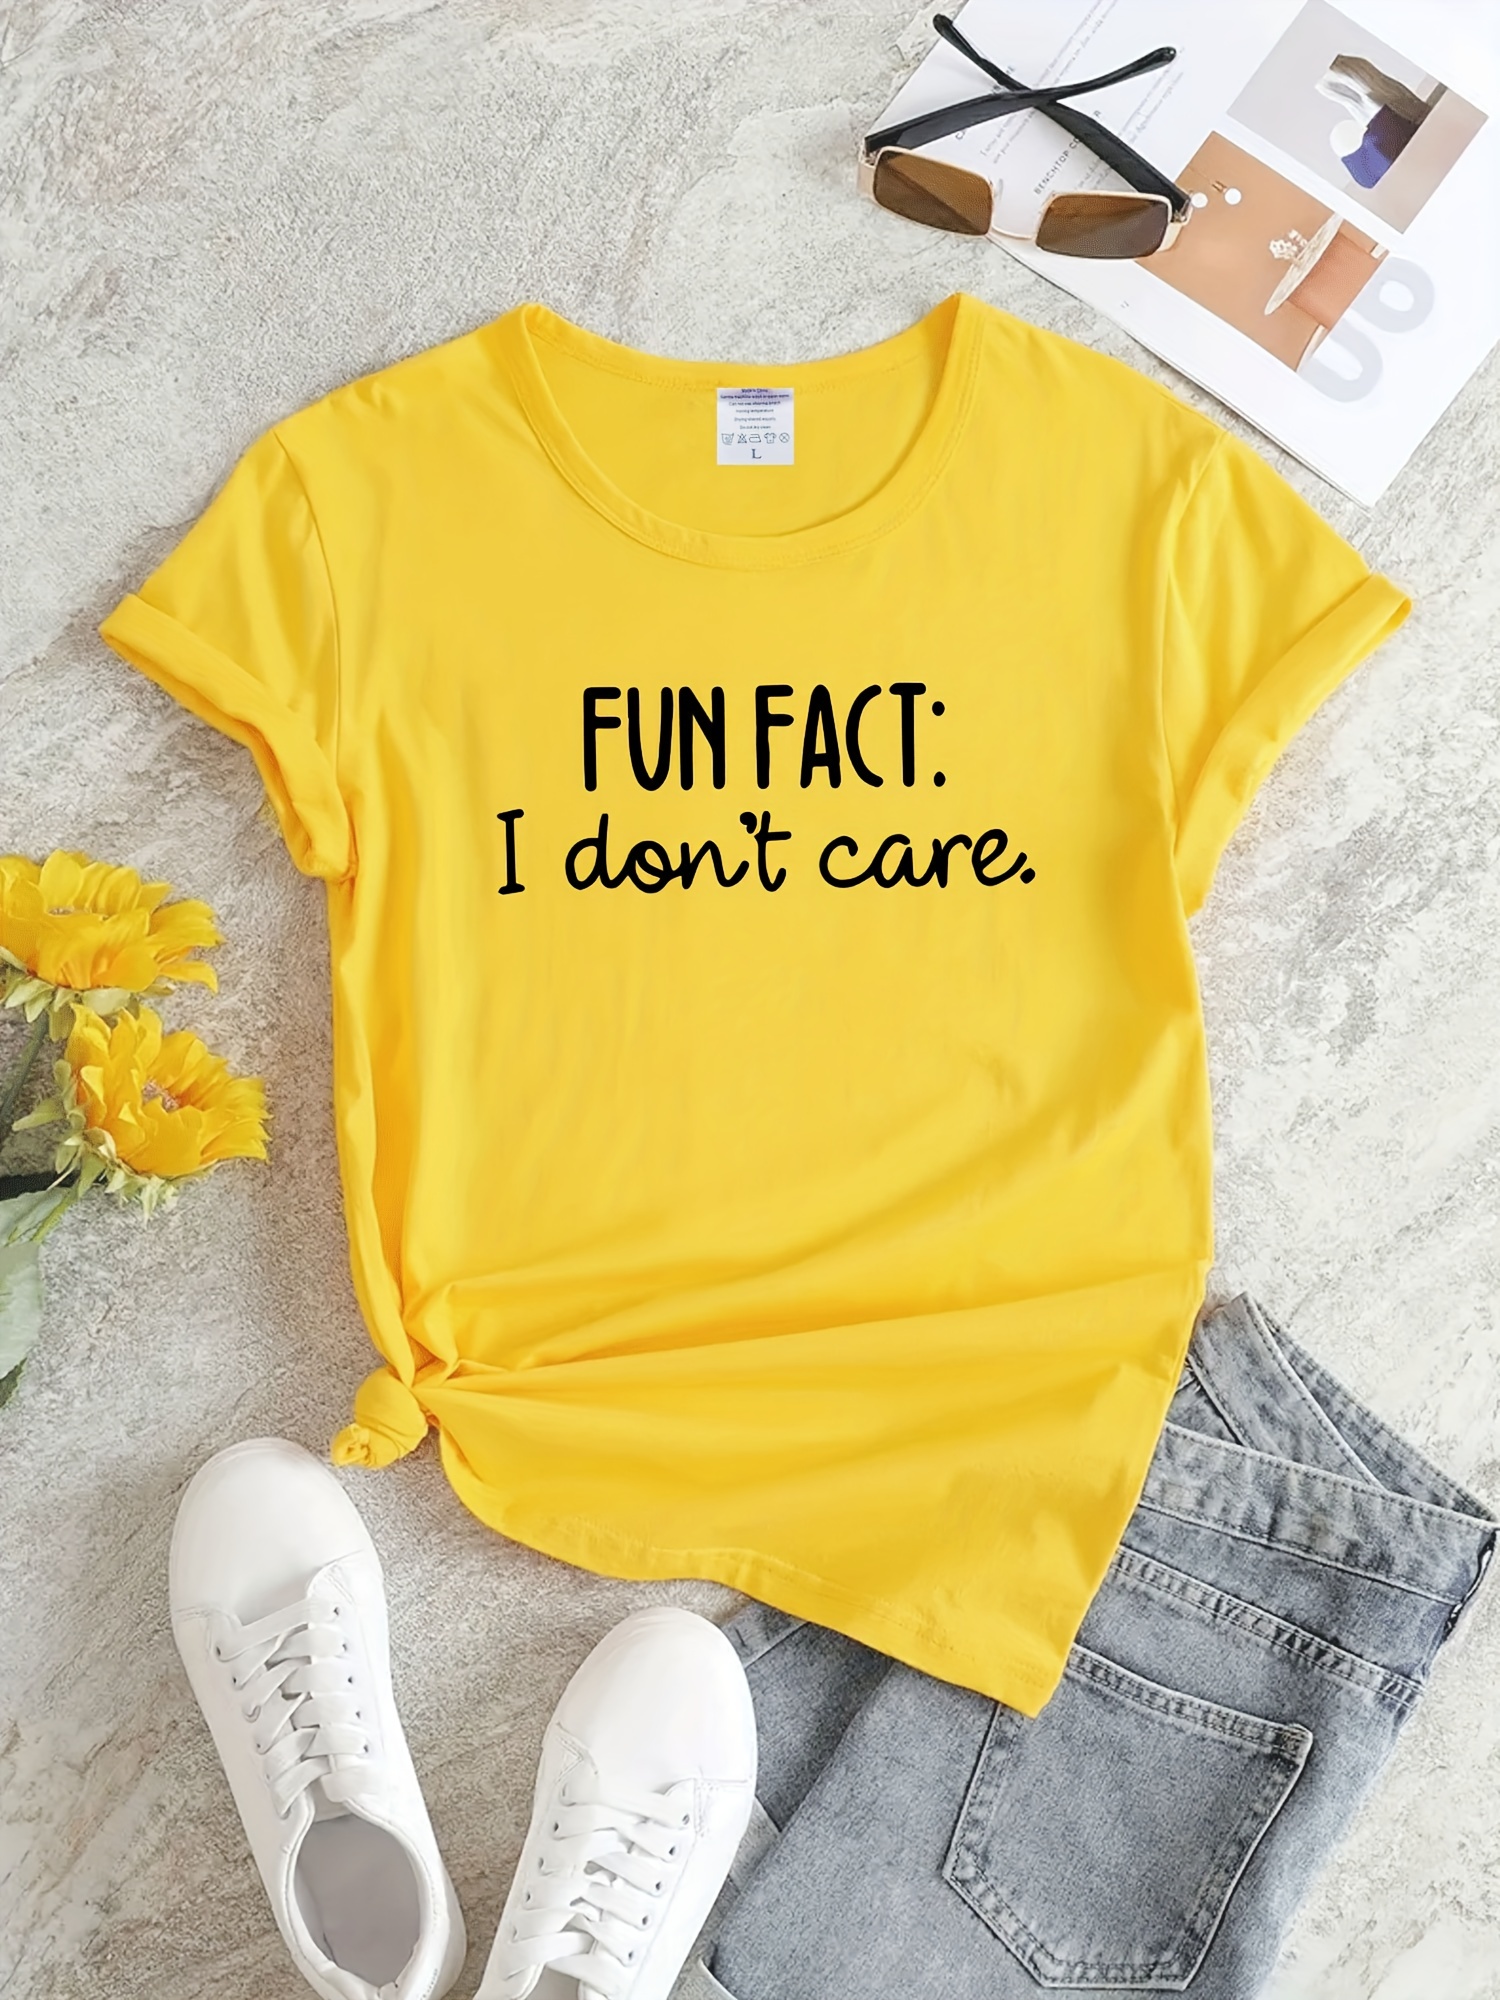 Zunfeo T Shirts for Women- Printed Pullover Funny Cute Tops Happy Fall Yall  Crew Neck Short Sleeve Lantern Sleeve T Shirts Yellow 6 